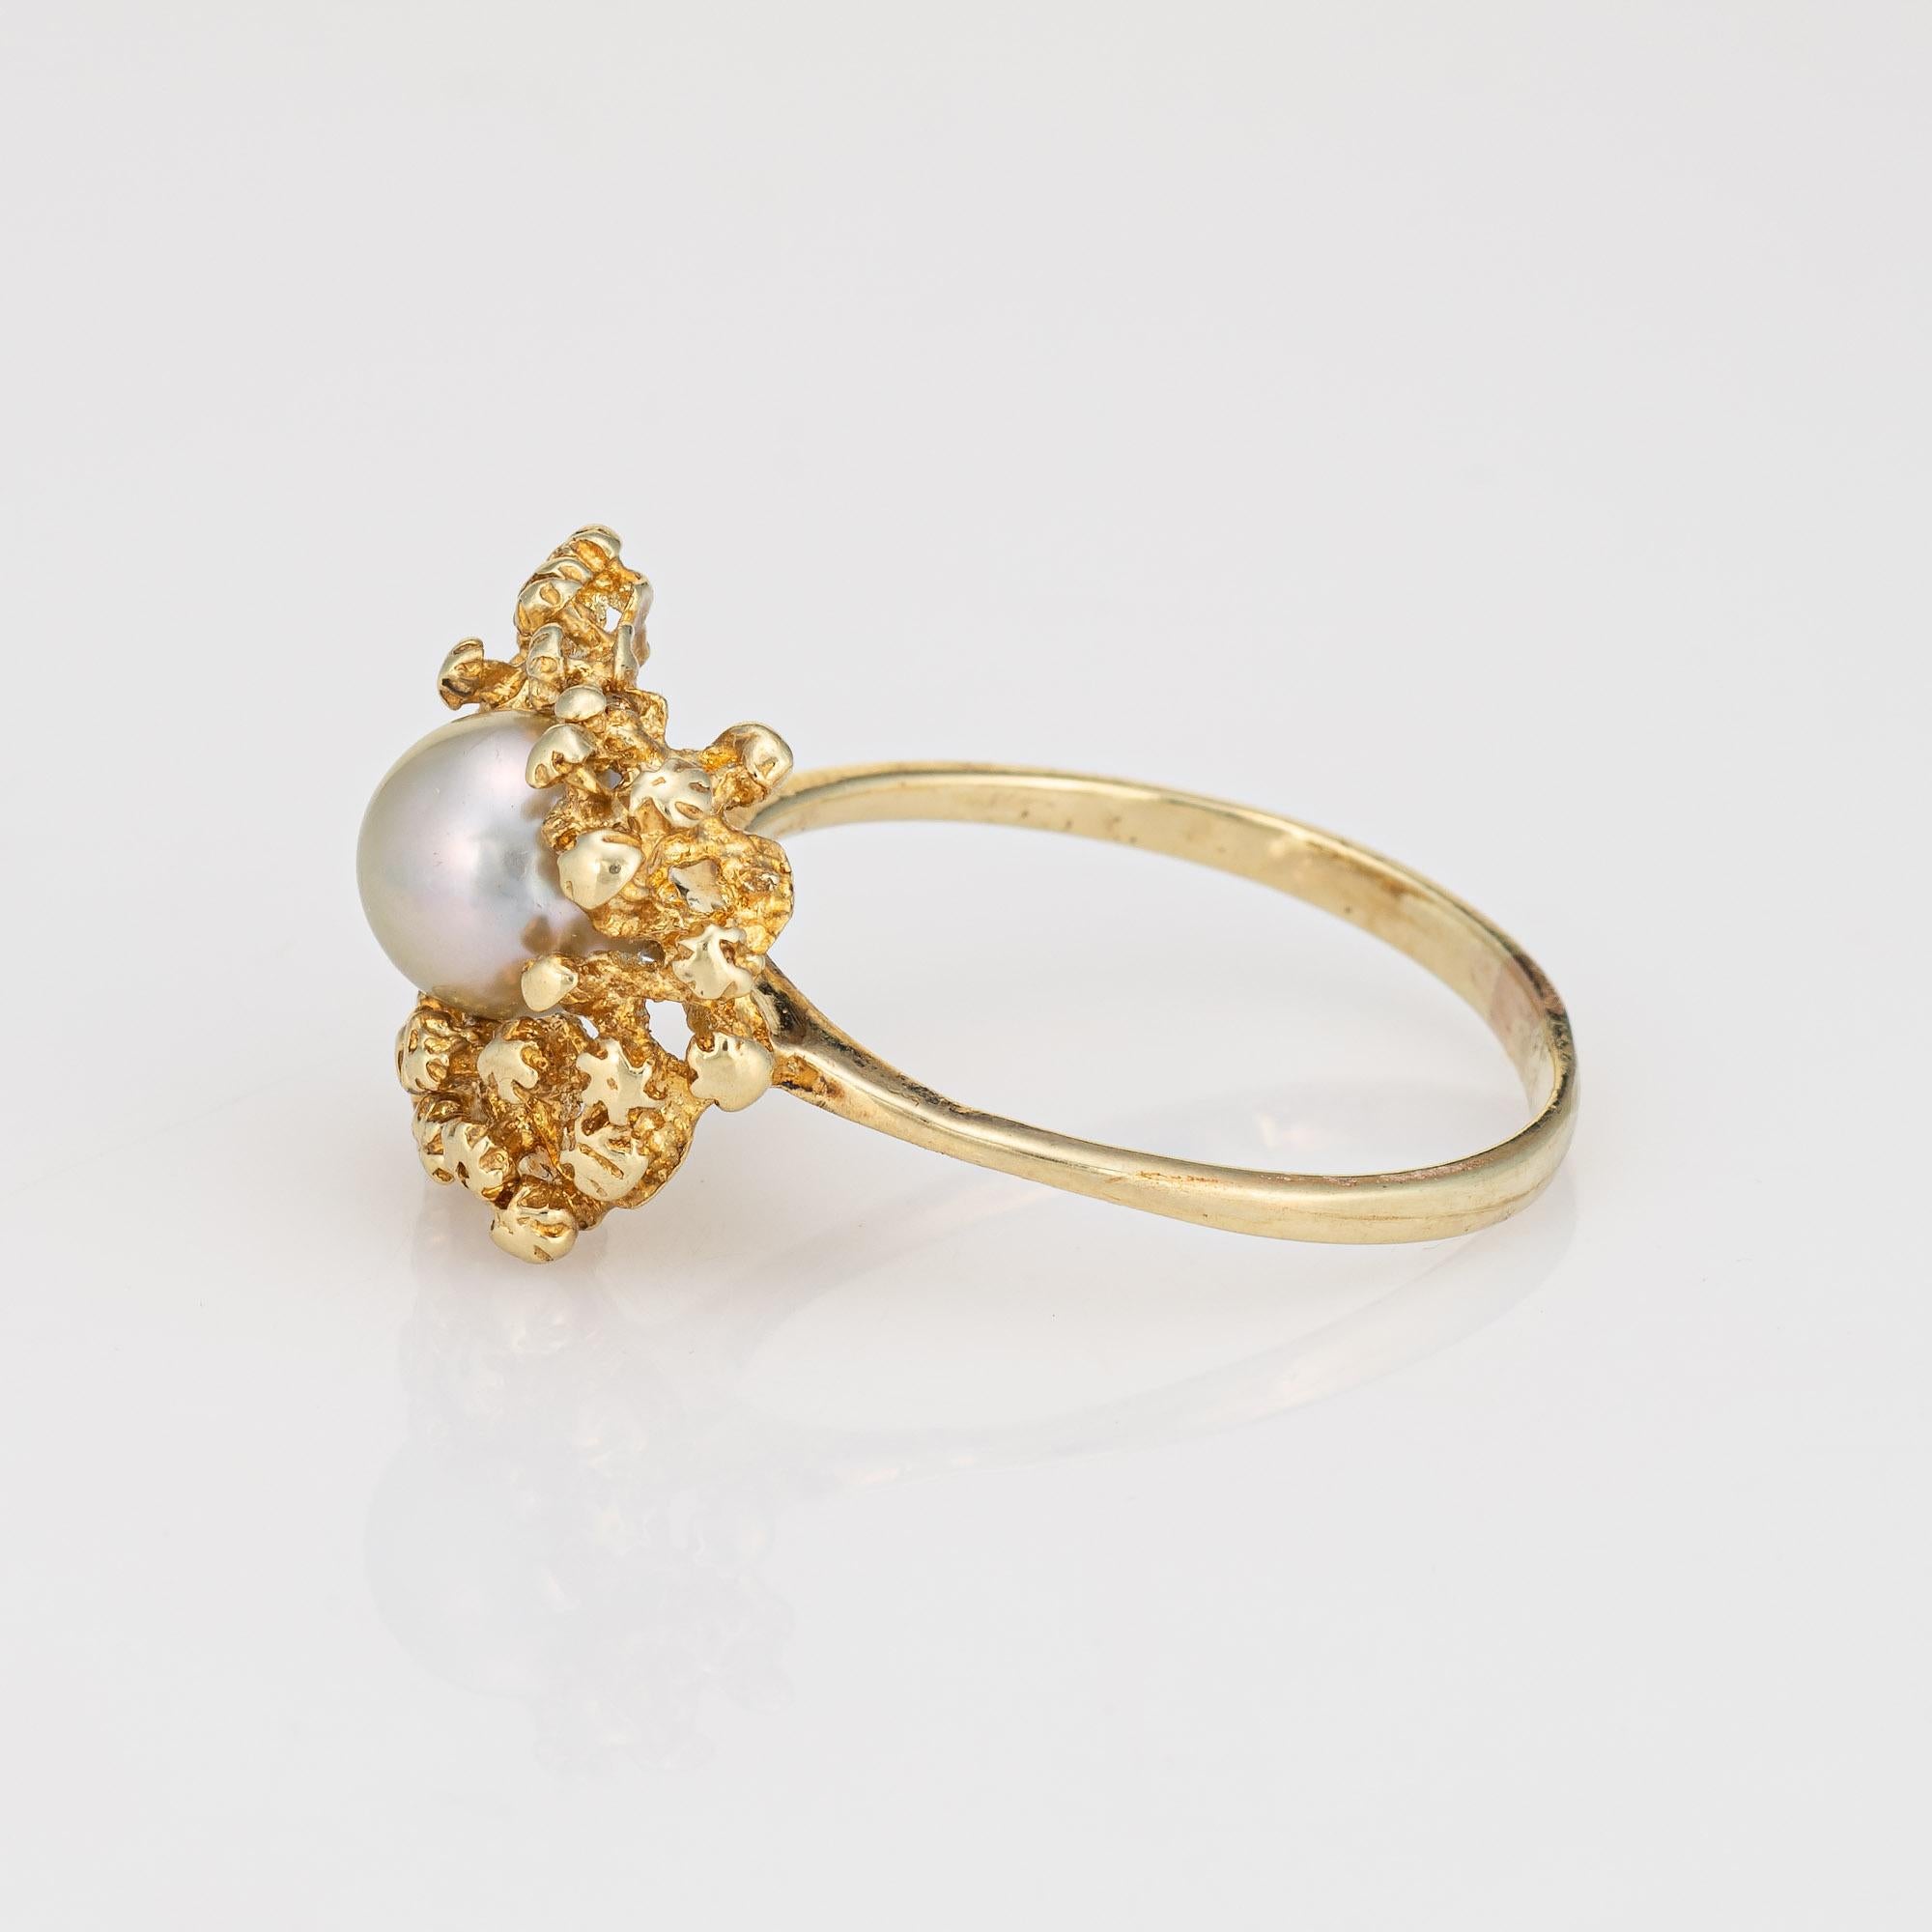 Round Cut Vintage Cultured Pearl Ring Abstract Nugget 14k Yellow Gold Sz 7 Fine Jewelry For Sale